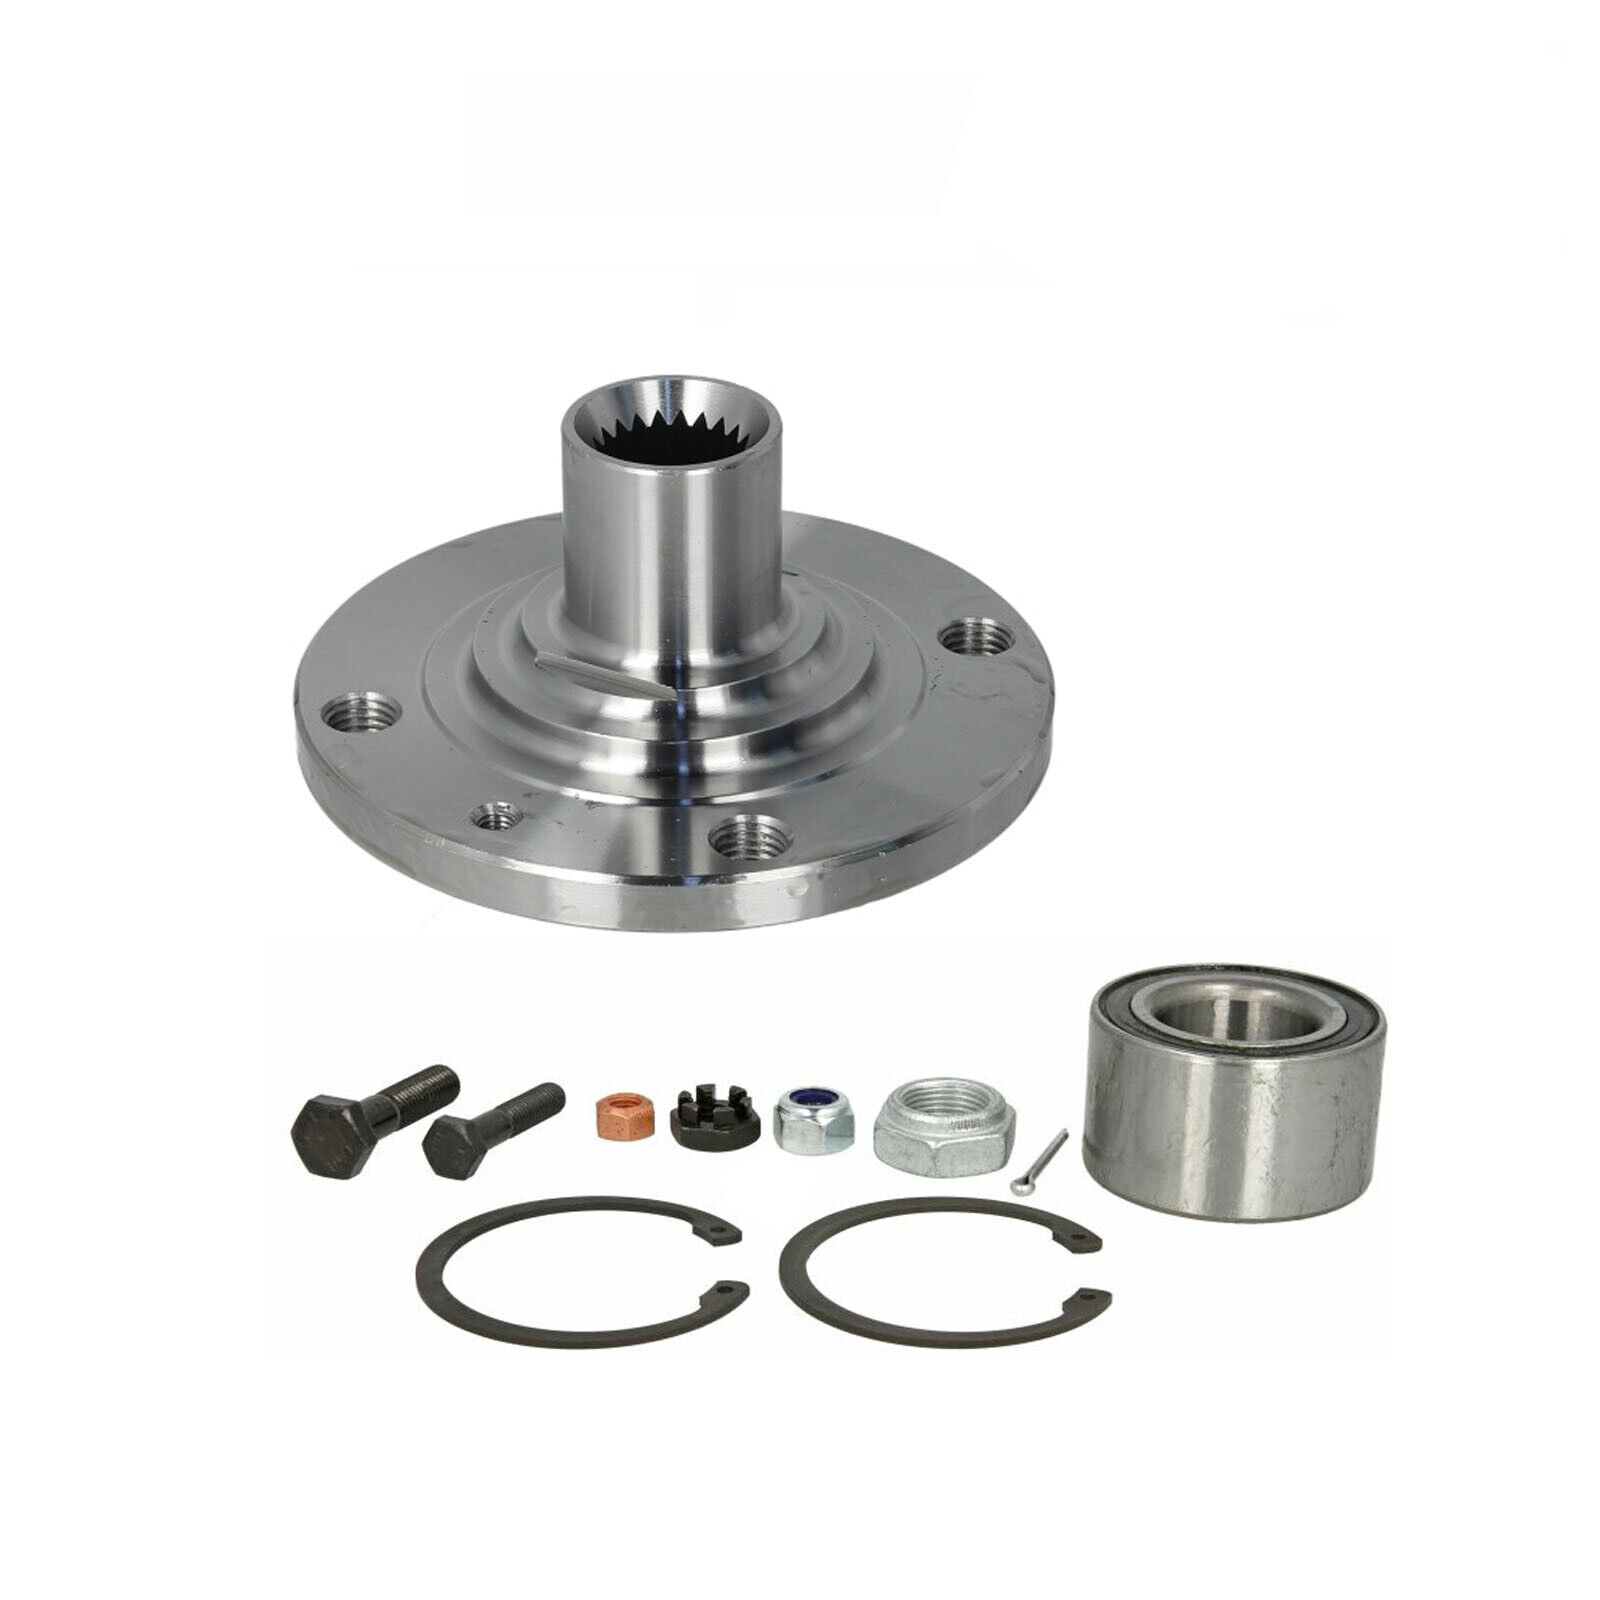 WHEEL HUB & BEARING KIT FRONT VW GOLF MK1 & CABRIOLET SCIROCCO CADDY A178